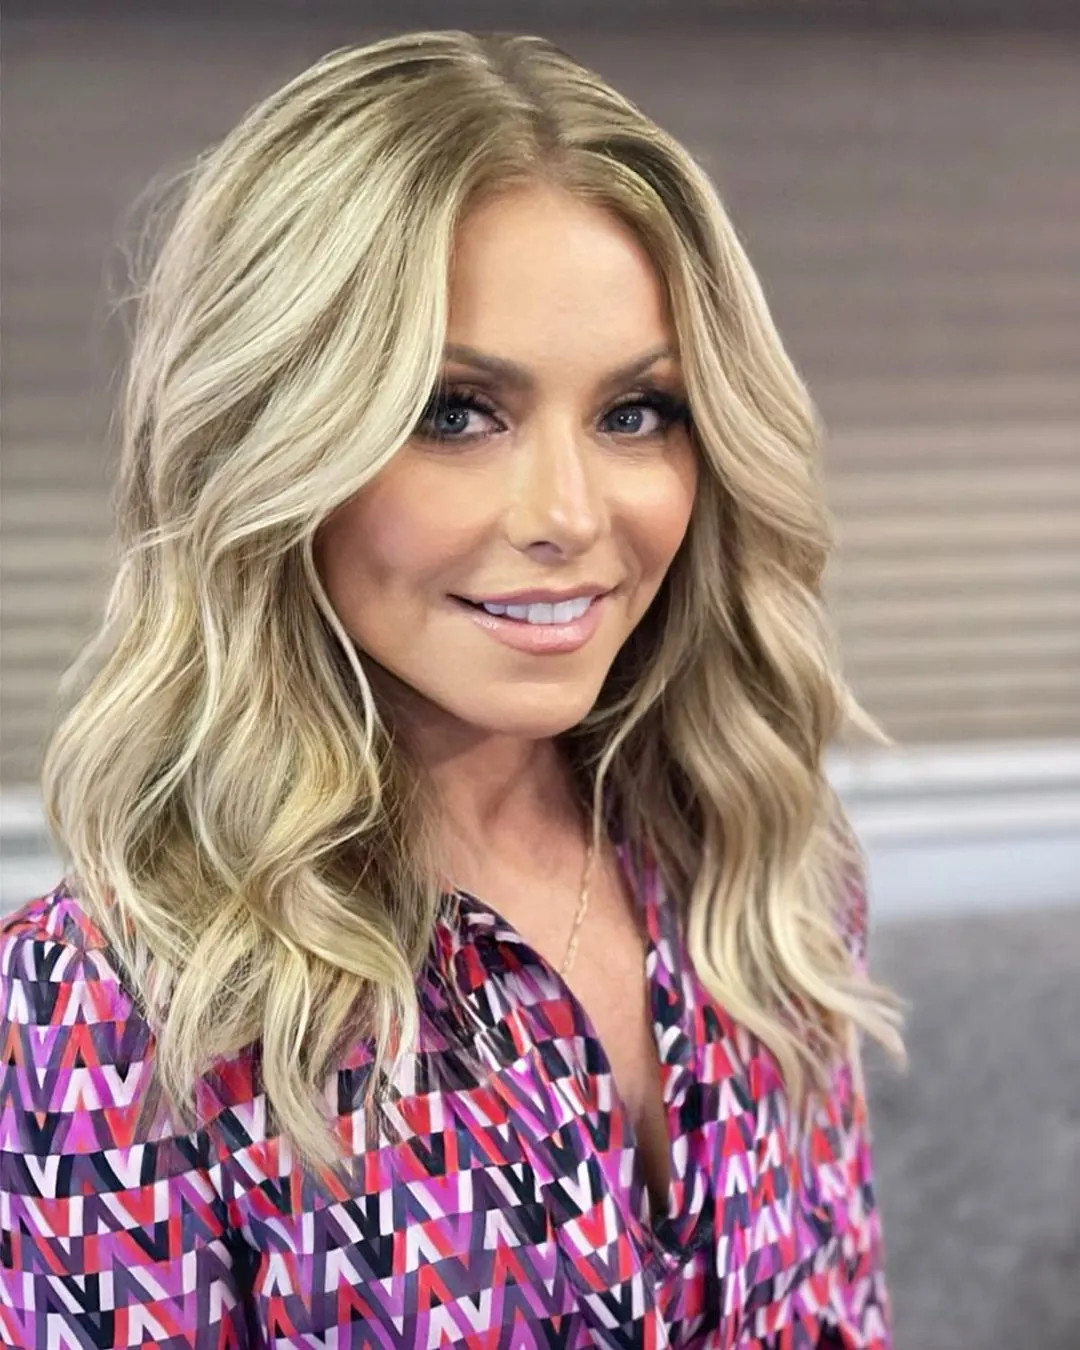 Kelly Ripa – Do You Know These Facts About Her? – Hollywood Web Stories